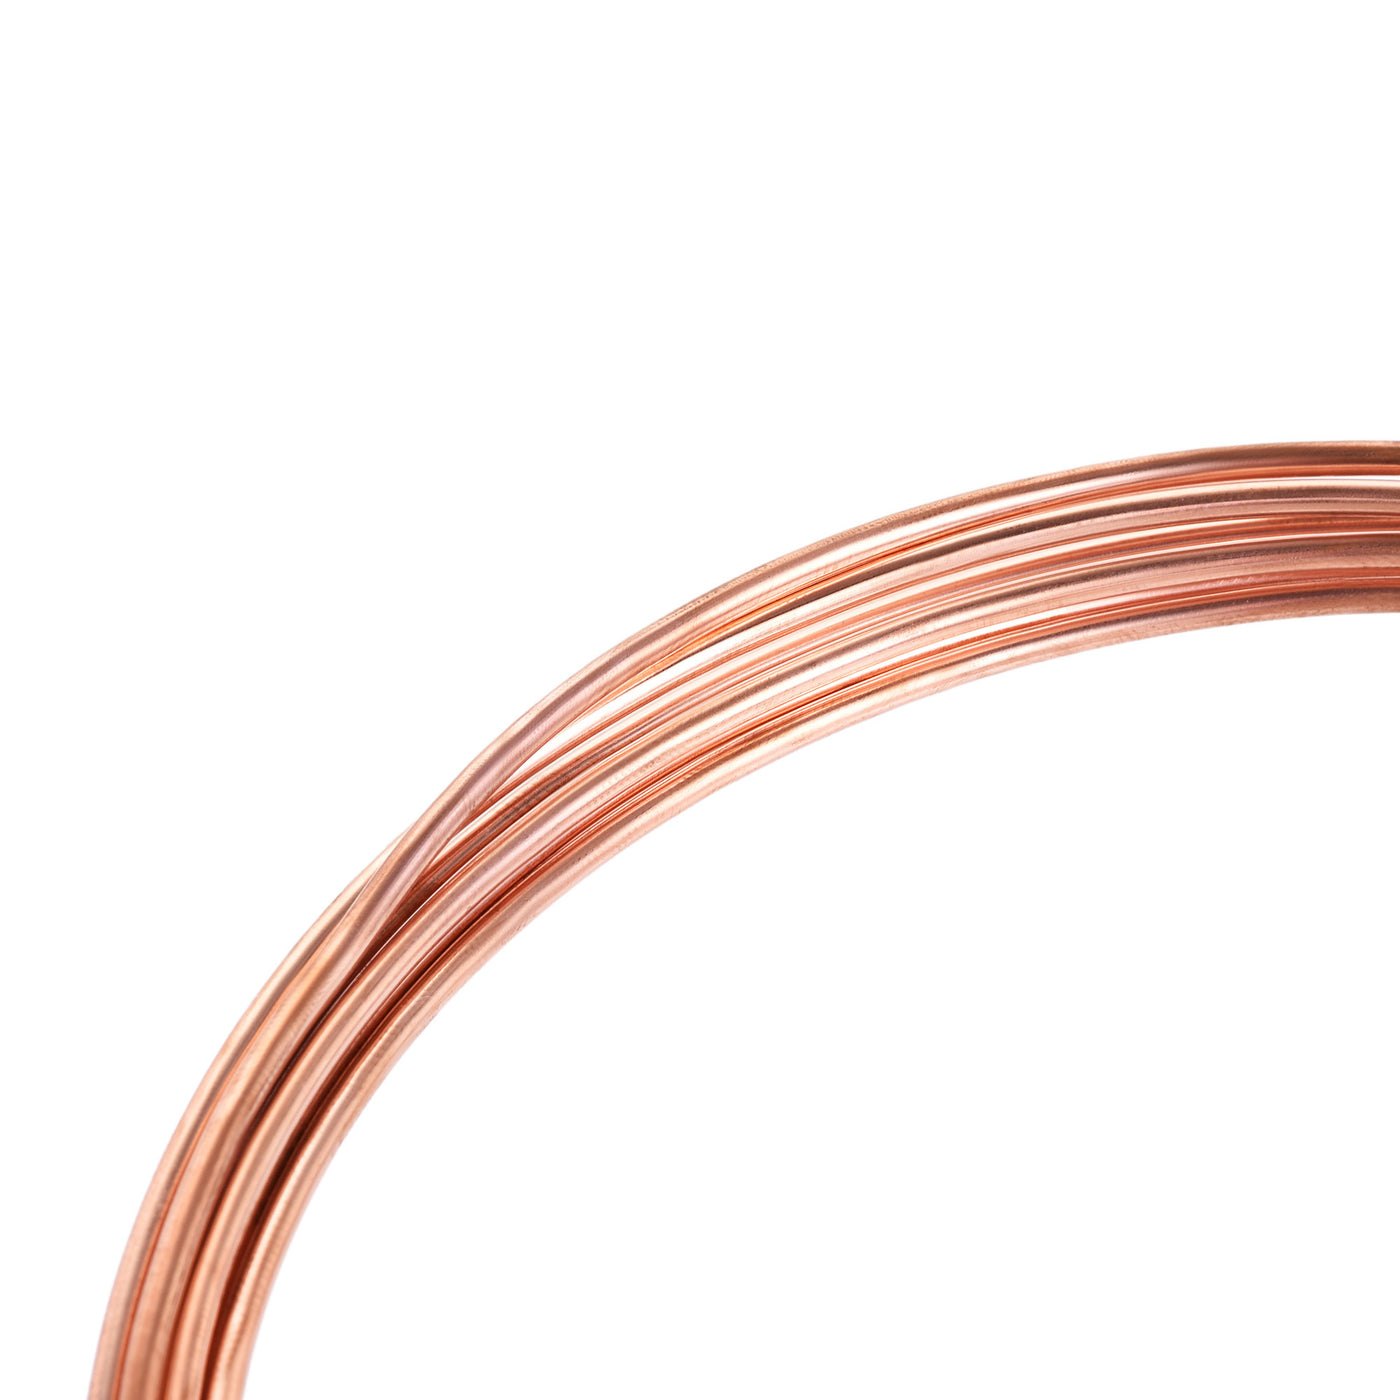 uxcell Uxcell Refrigeration Tubing 1.8mm OD 0.8mm ID 6.5Ft Length Copper Tubing Coil